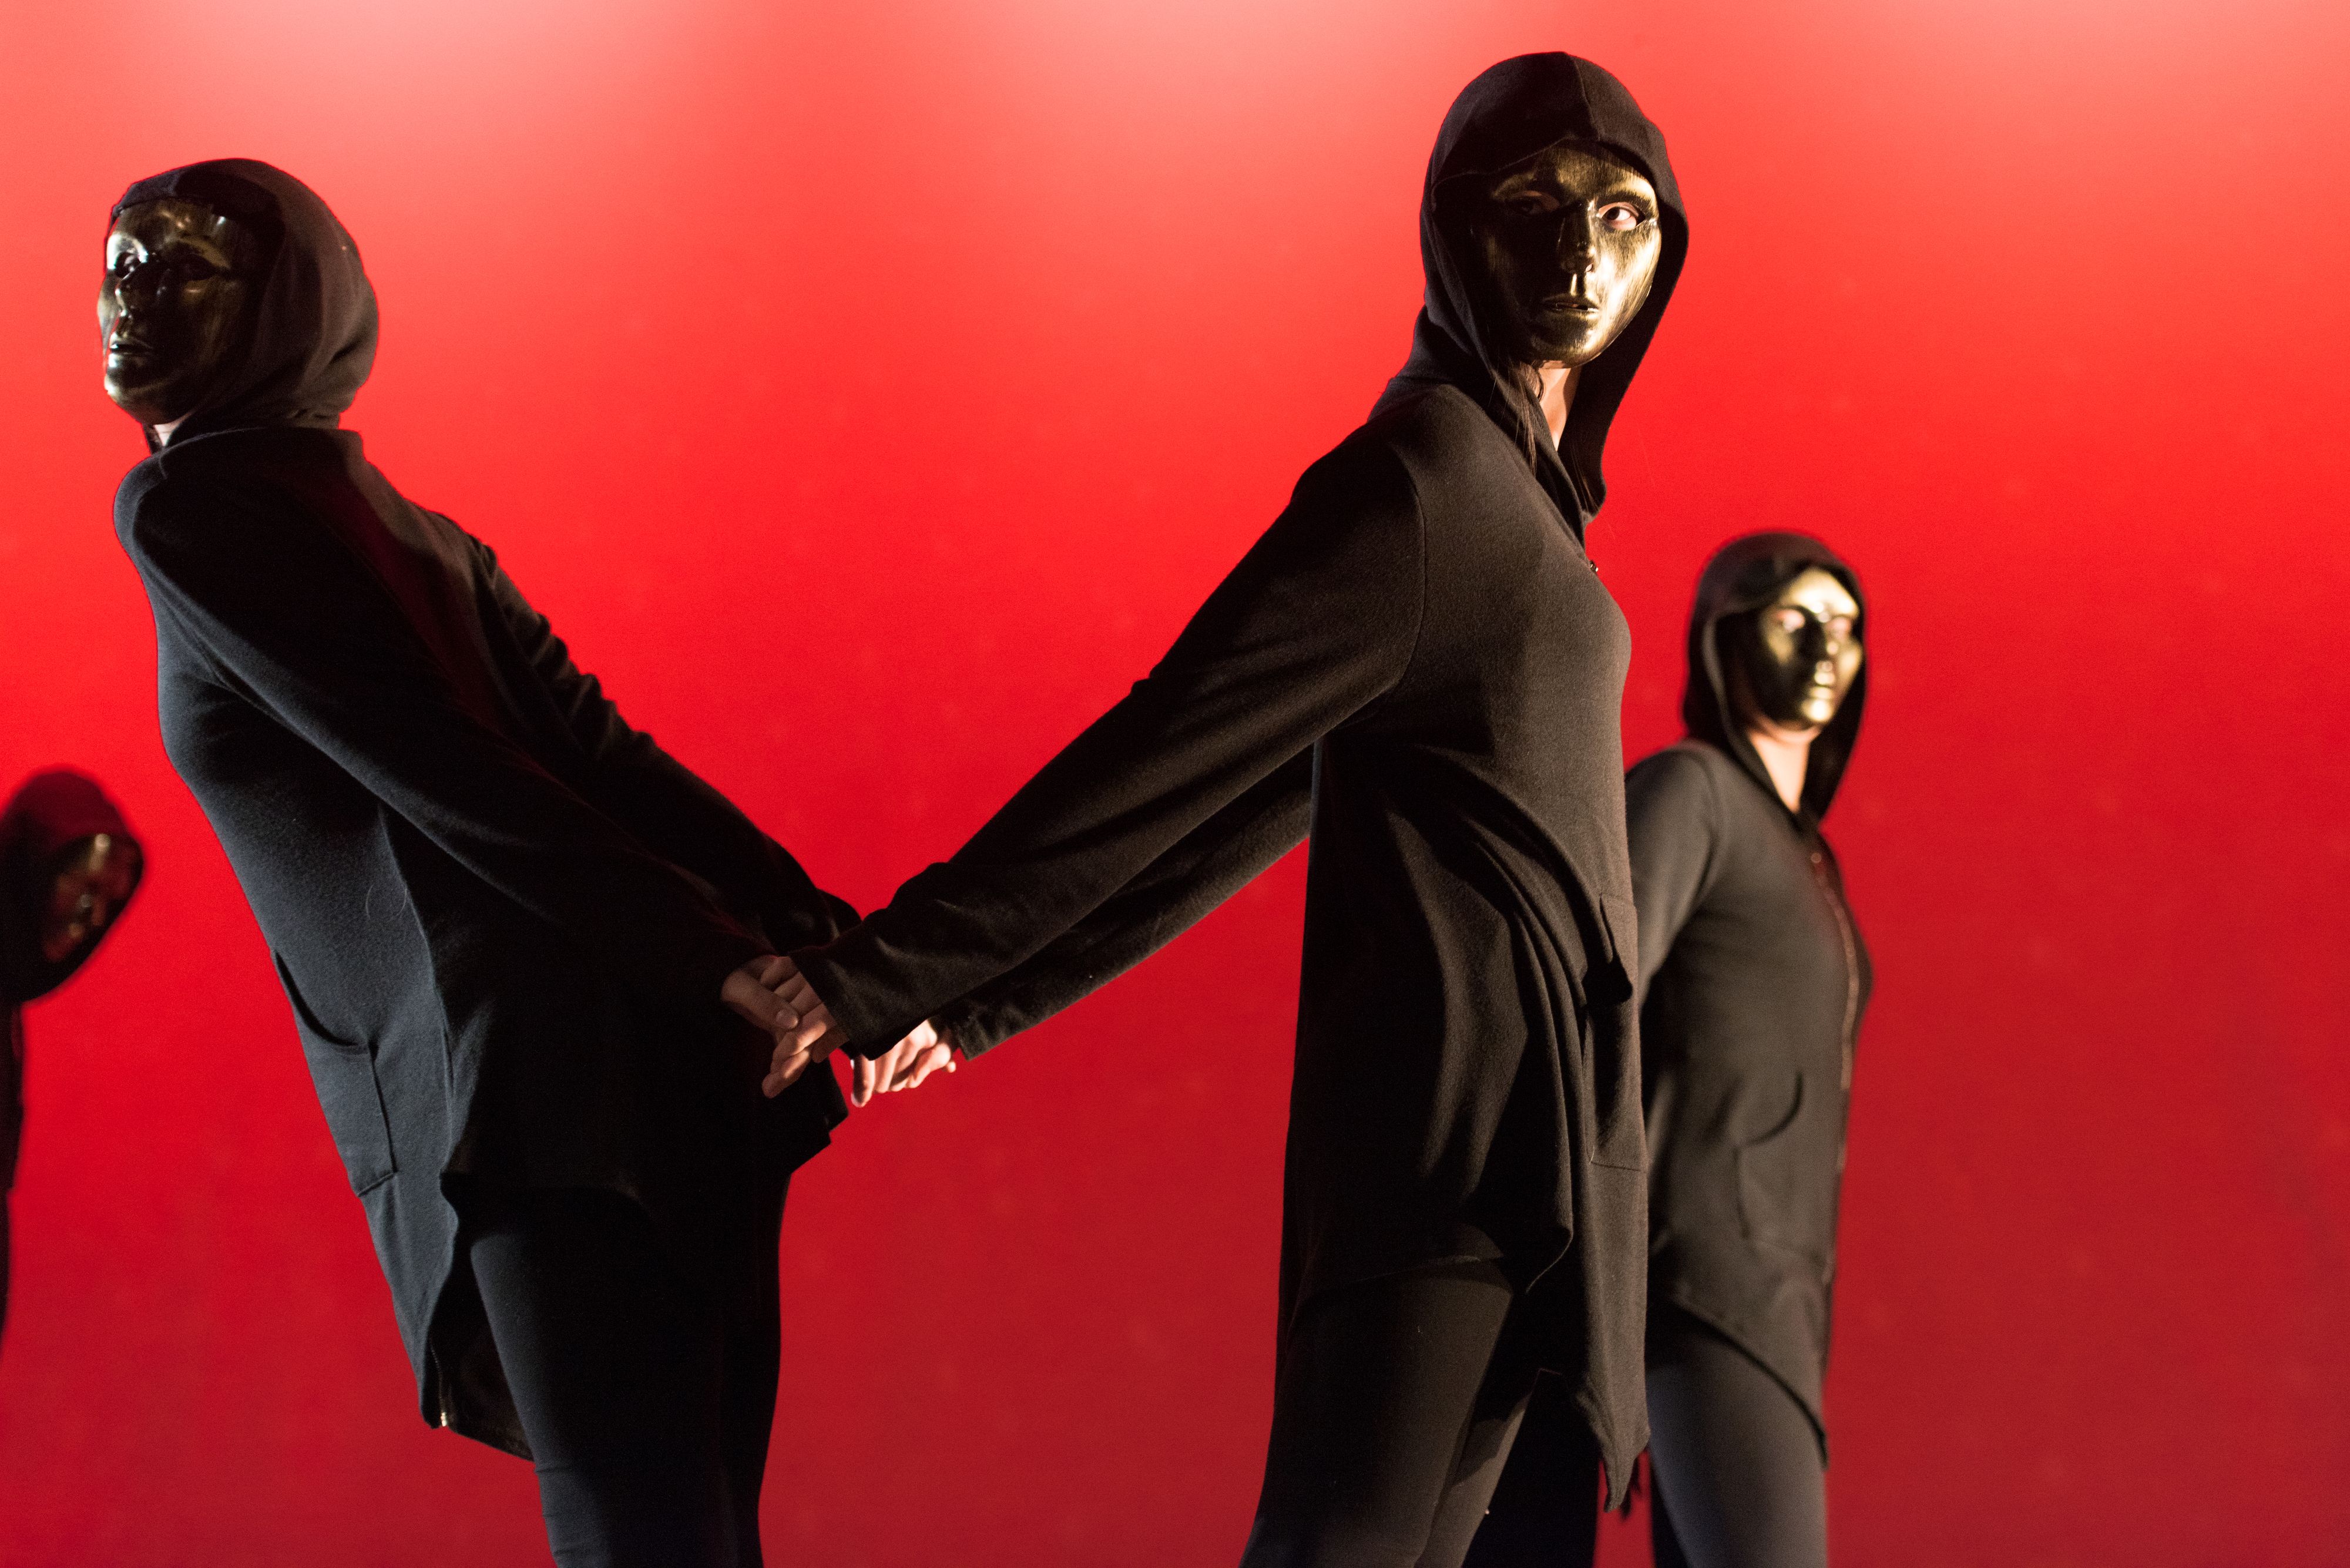 Four dancers in black outfits and masks on red background